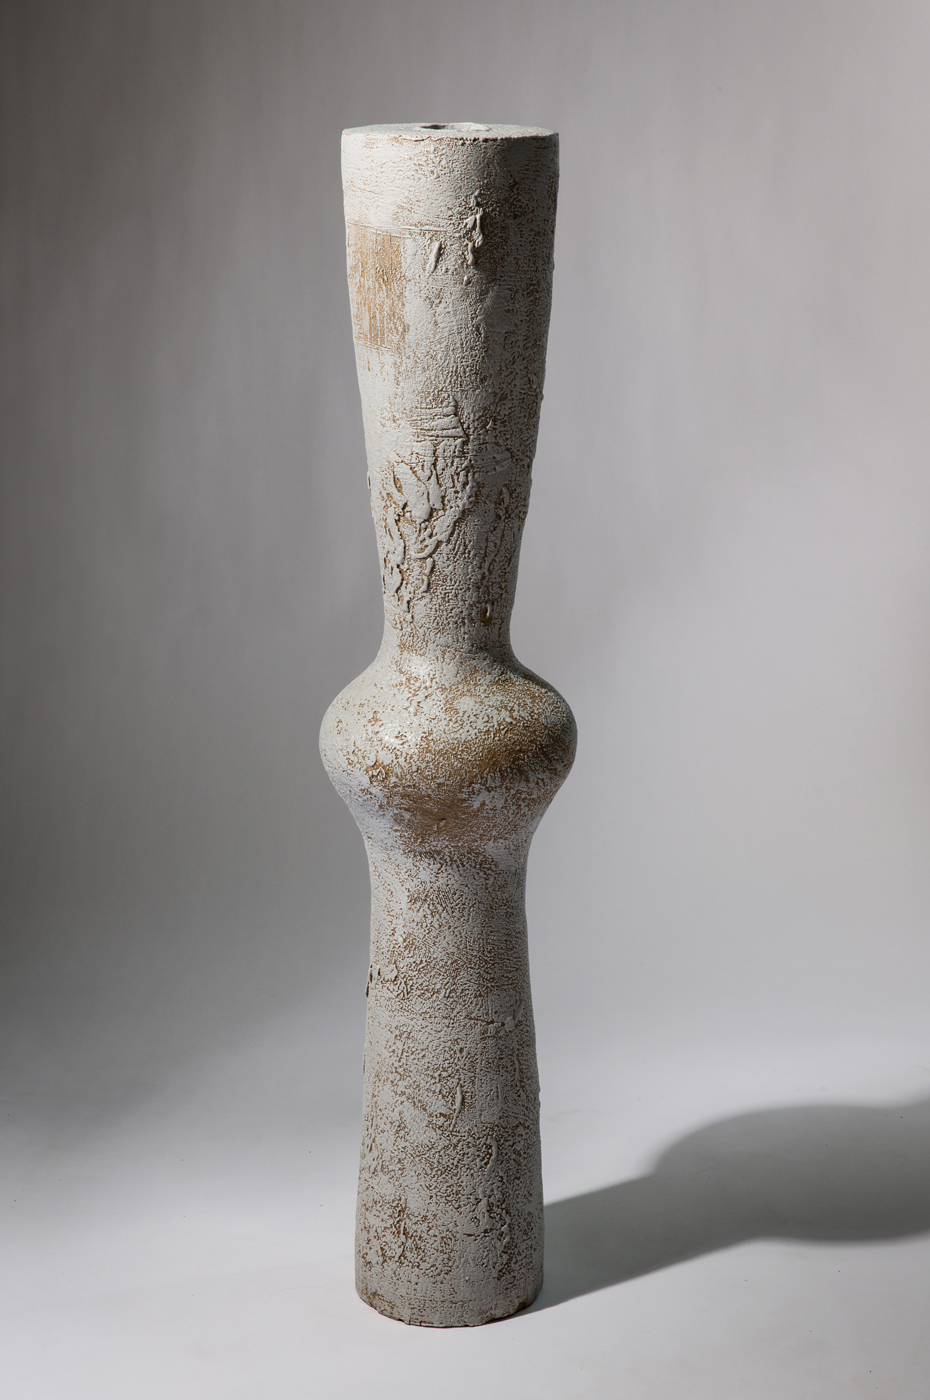 UNTITLED (TR439), 2013, stoneware and slip, 44 3/4 in H; private collection